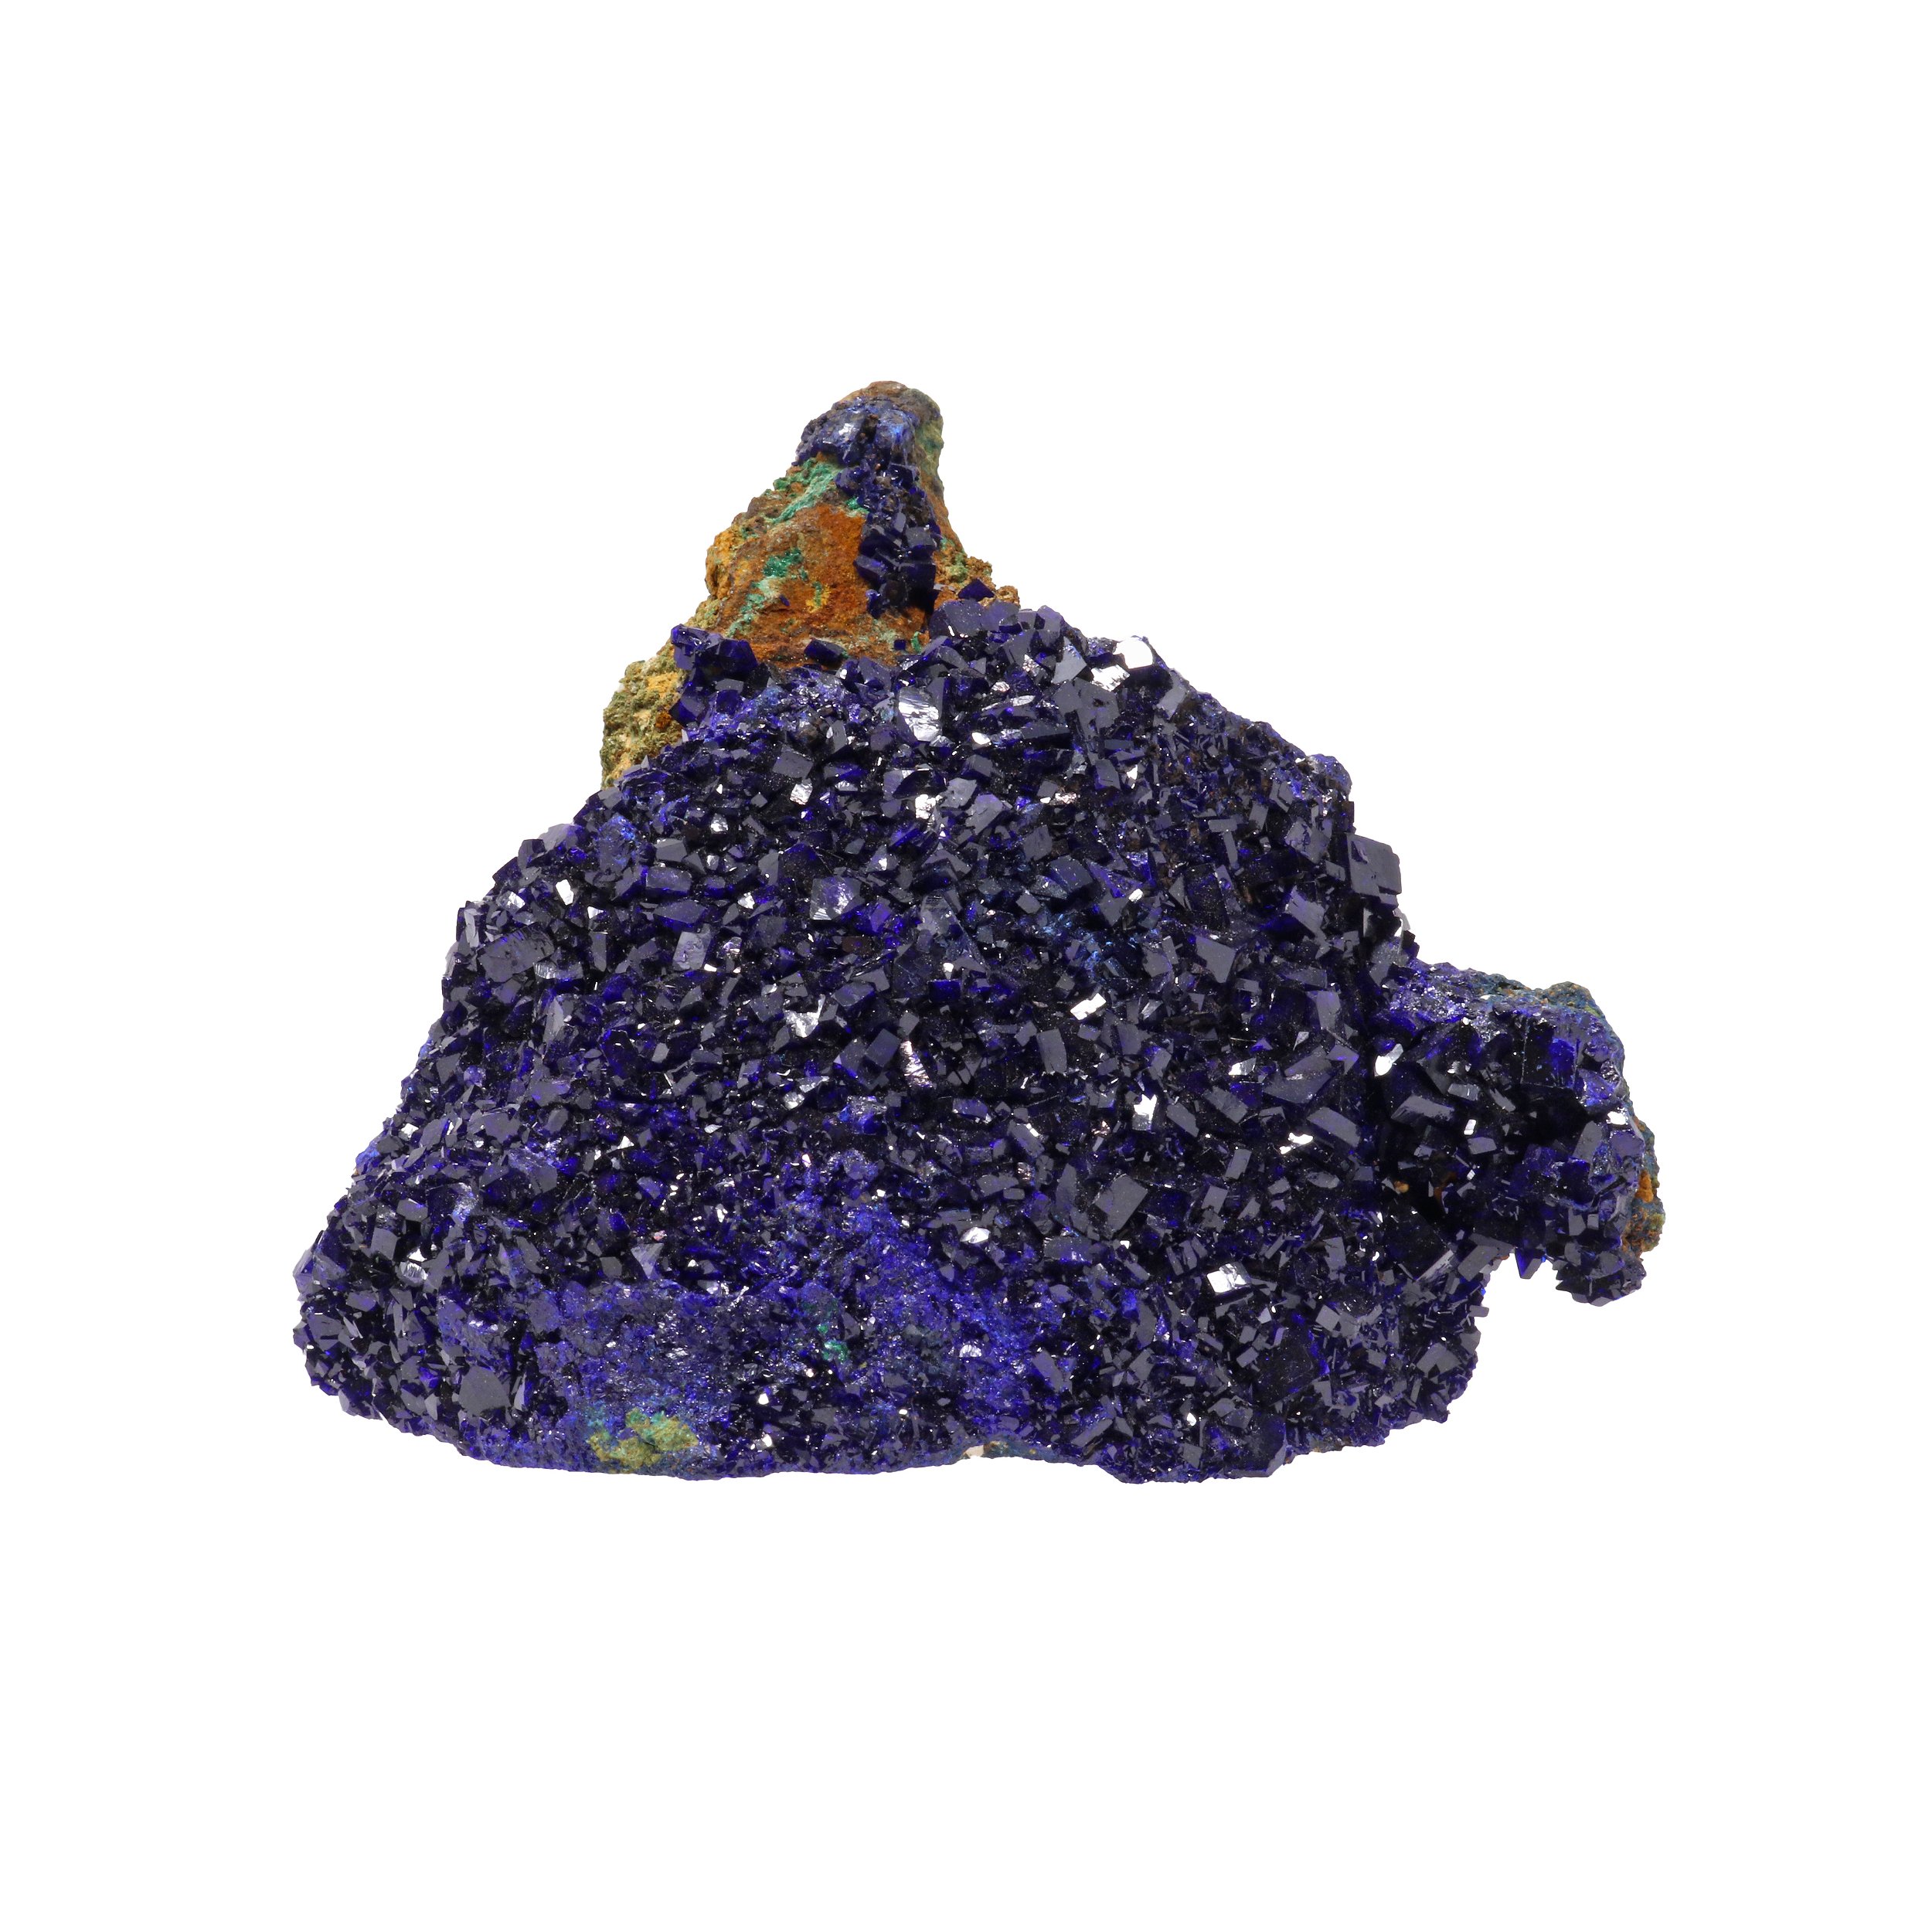 Azurite Specimen On An Acrylic Stand - Large Patch Of Midnight Blue  Crystals | Rare Earth Gallery